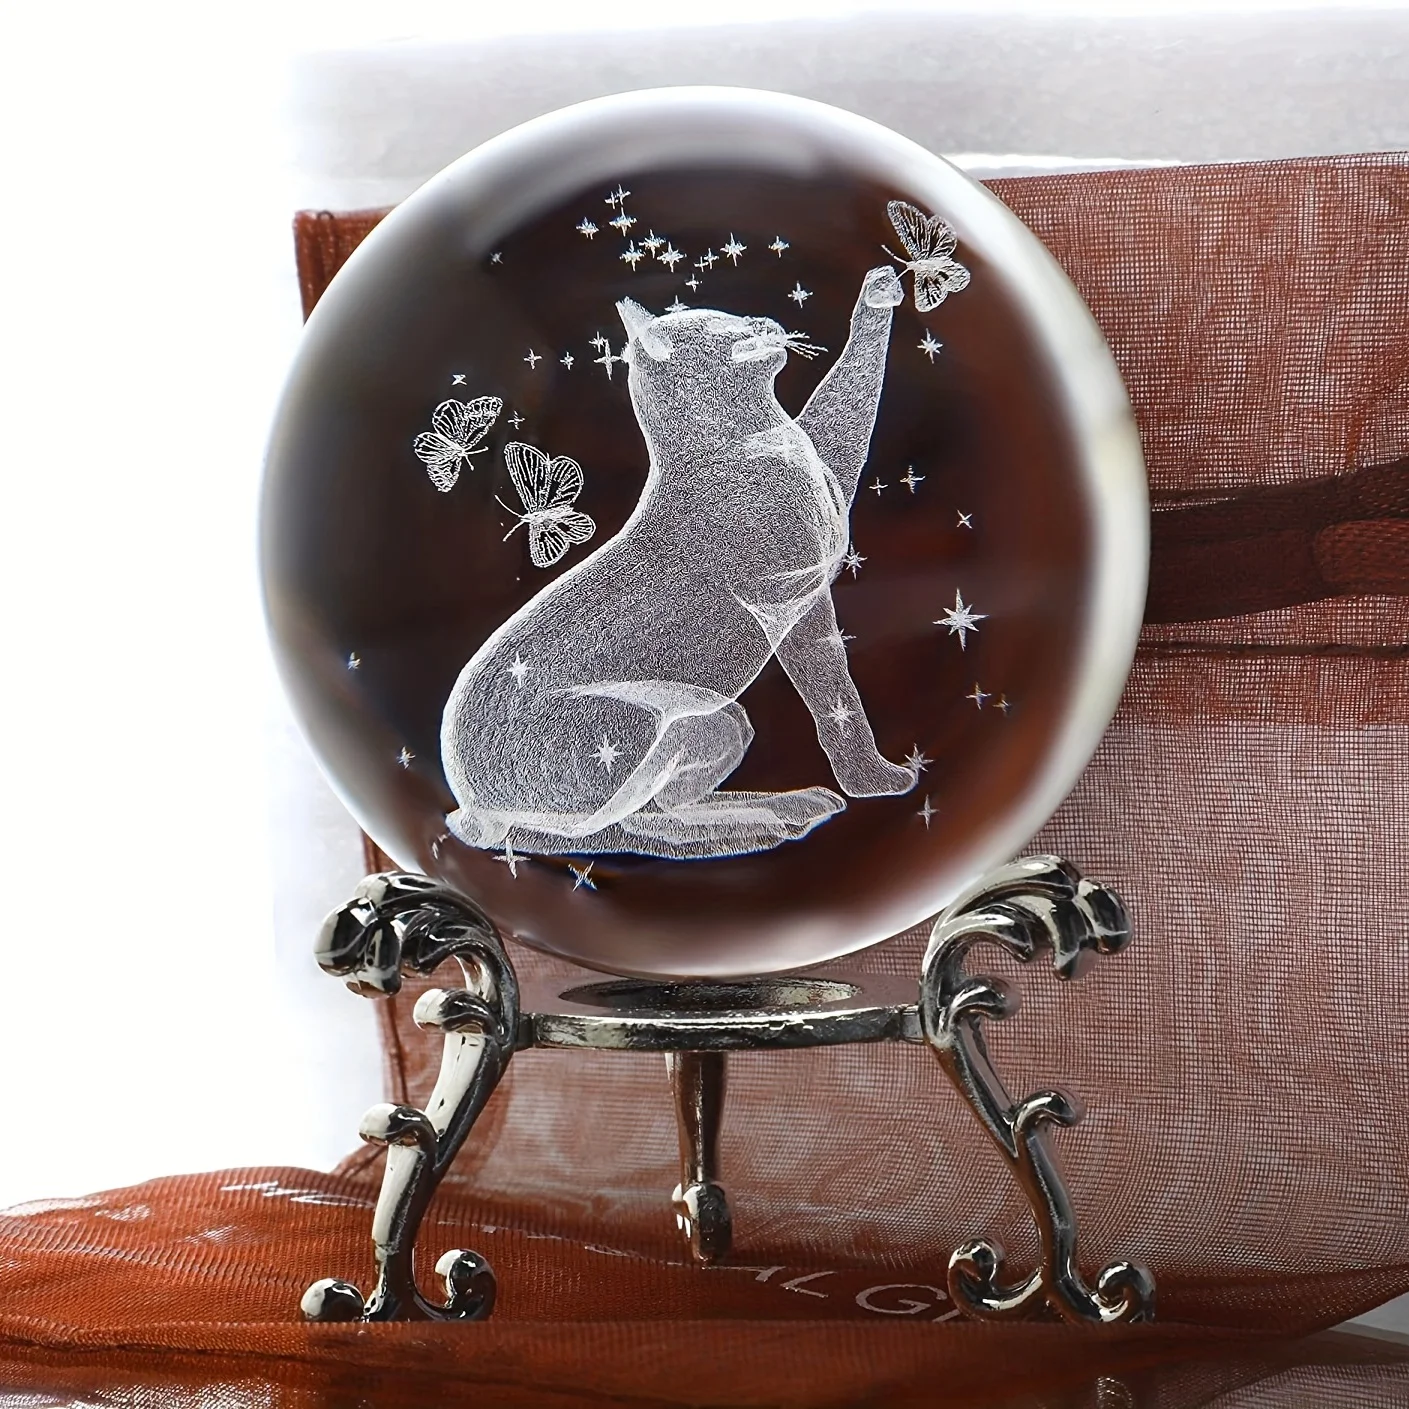 

3D Laser Cat And Butterfly Statue Crystal Ball, Decorative Ball, Home Decor Gift 60mm, 2.4inch